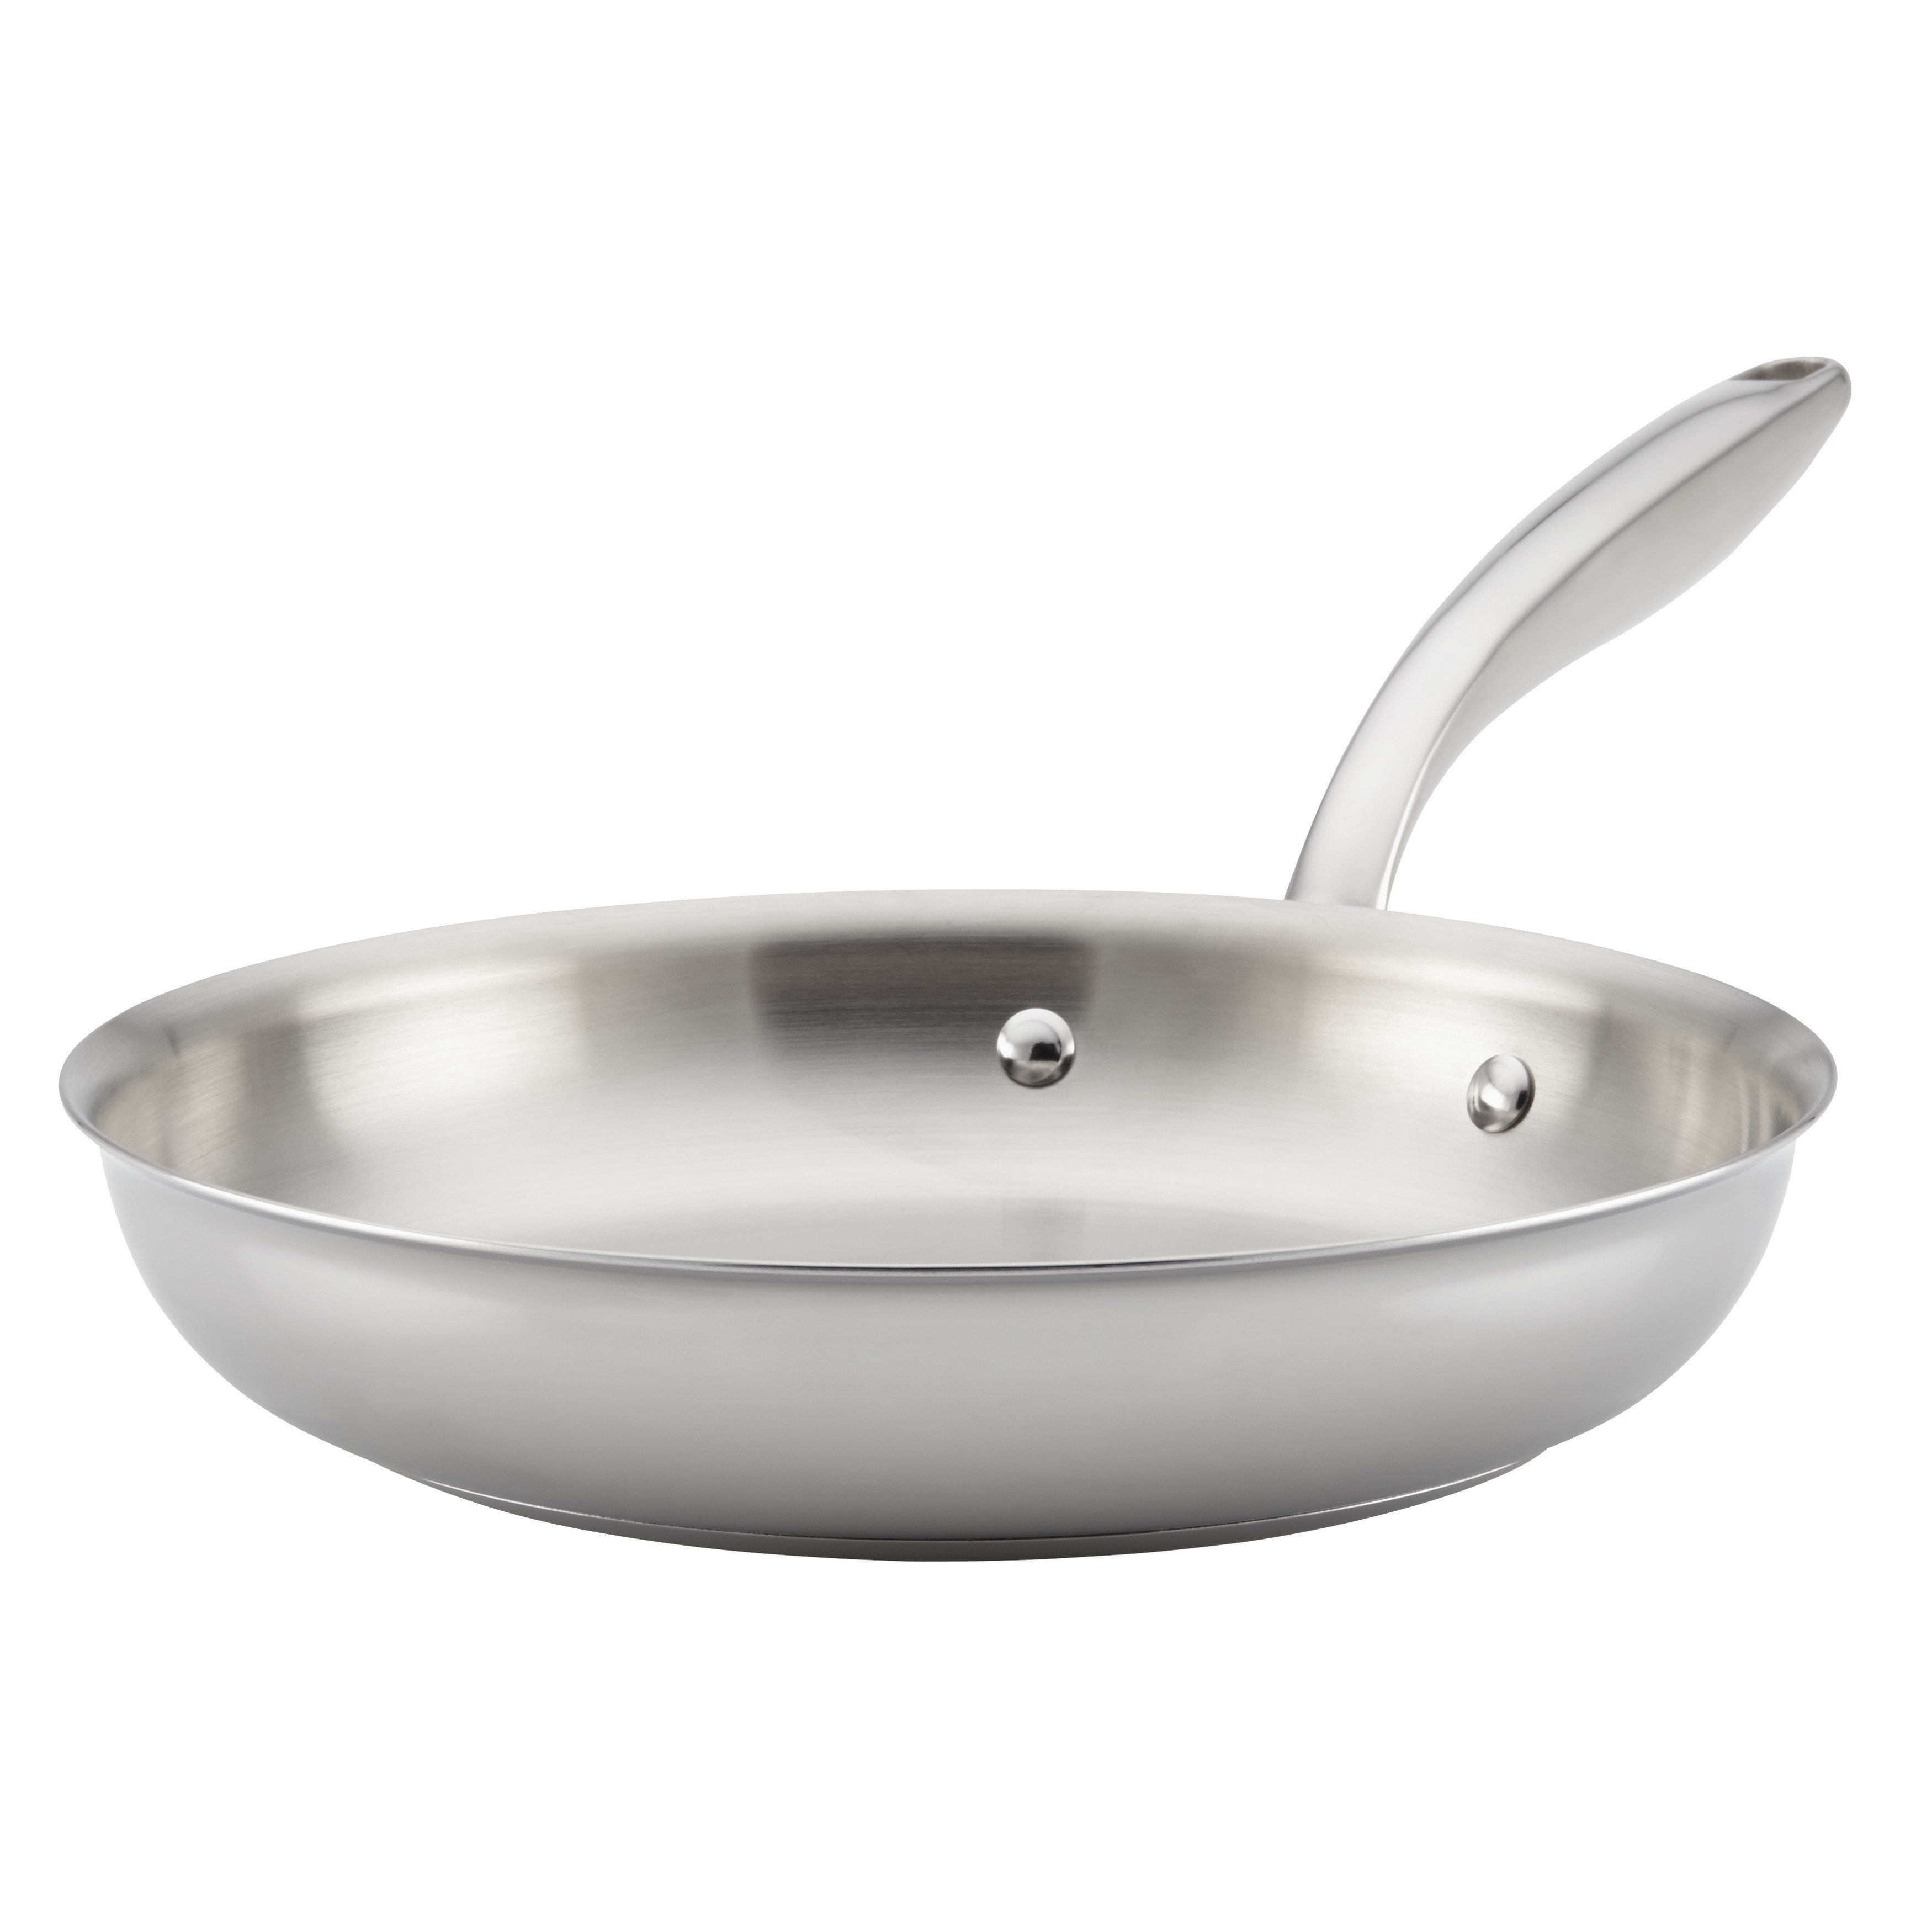 https://ak1.ostkcdn.com/images/products/14819752/Breville-r-Thermal-Pro-tm-Clad-Stainless-Steel-10-Inch-Fry-Pan-928f8a5a-6455-4903-b0e1-28c73b6f3527.jpg